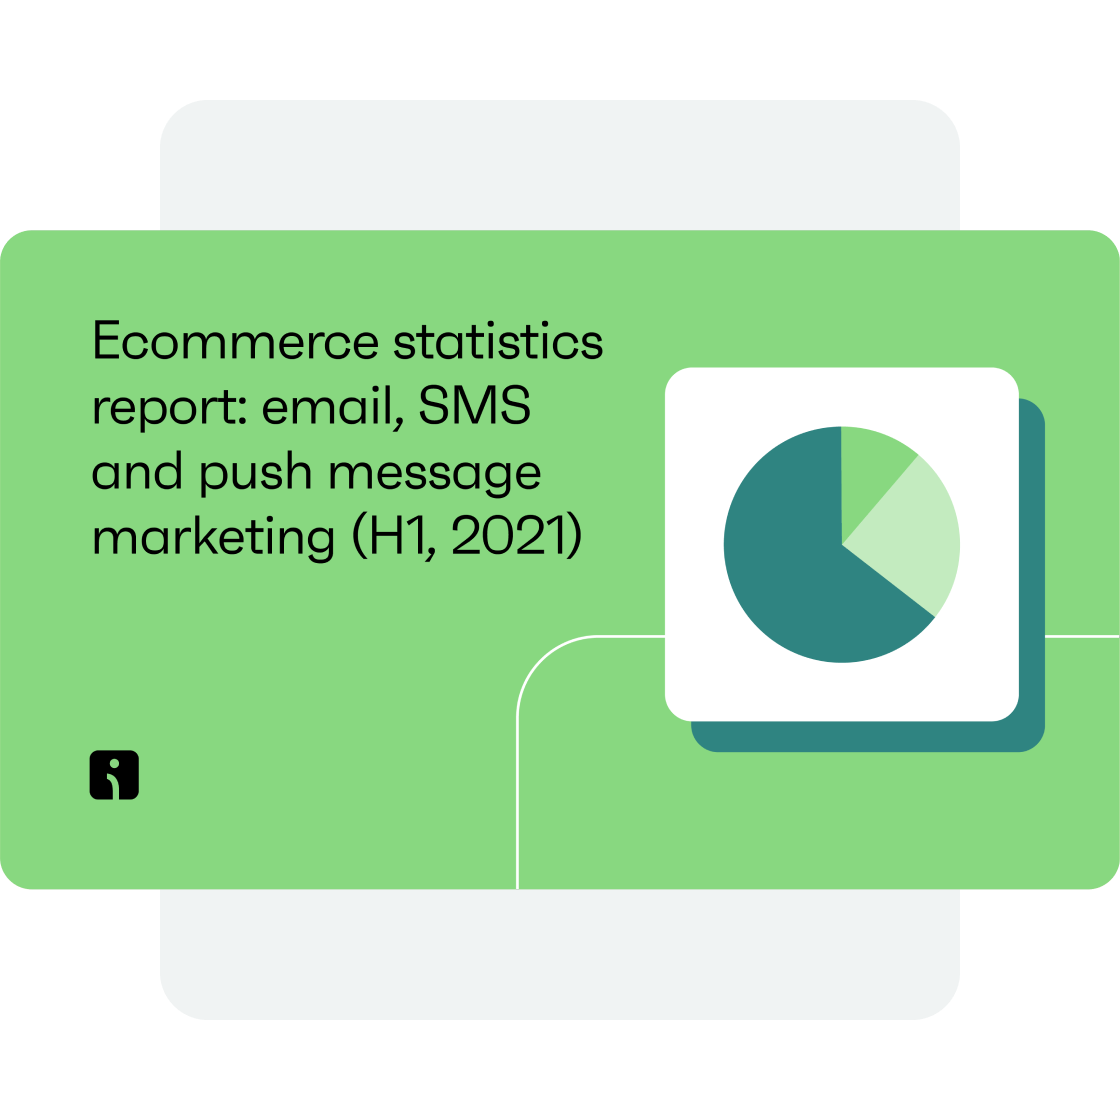 Ecommerce statistics report: Email, SMS, and push message marketing (H1, 2021)